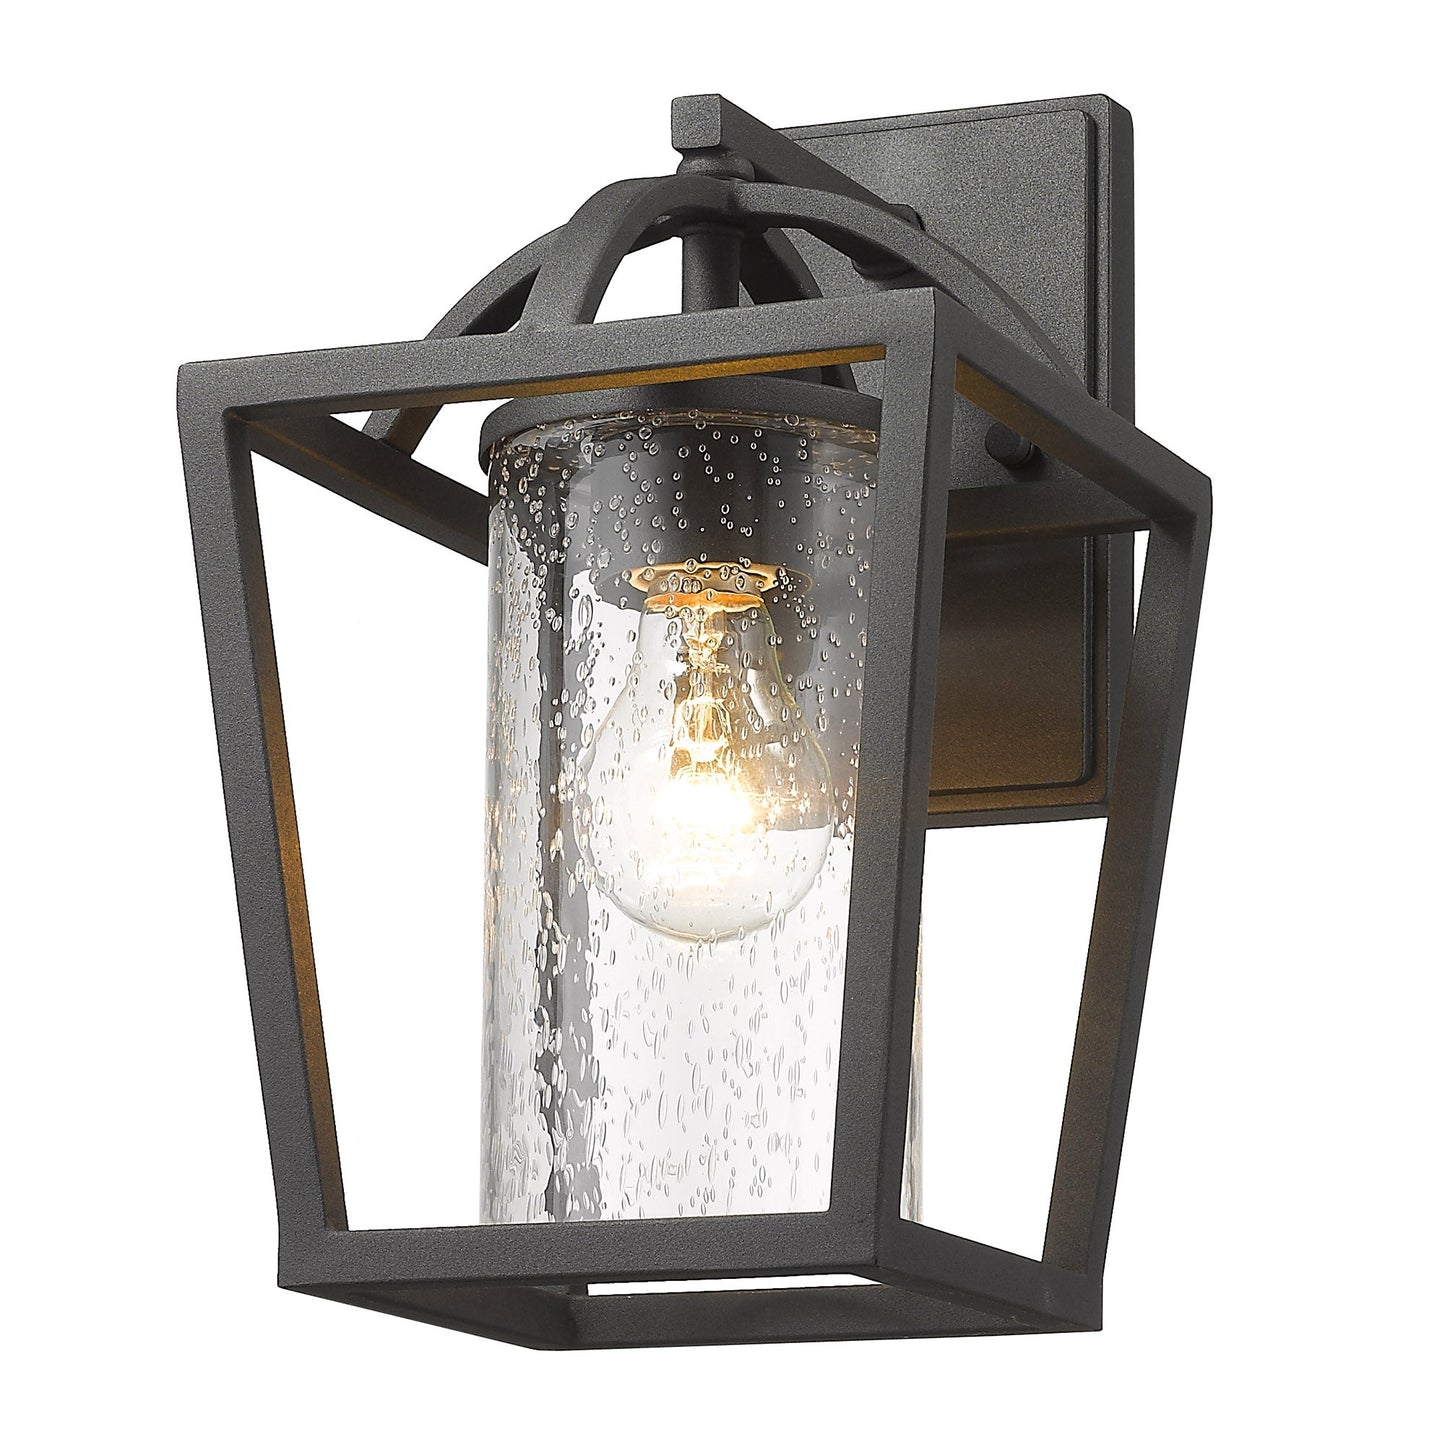 Traditional | Industrial-Inspired Lantern Medium Wall Sconce With Seeded Glass - Showroom